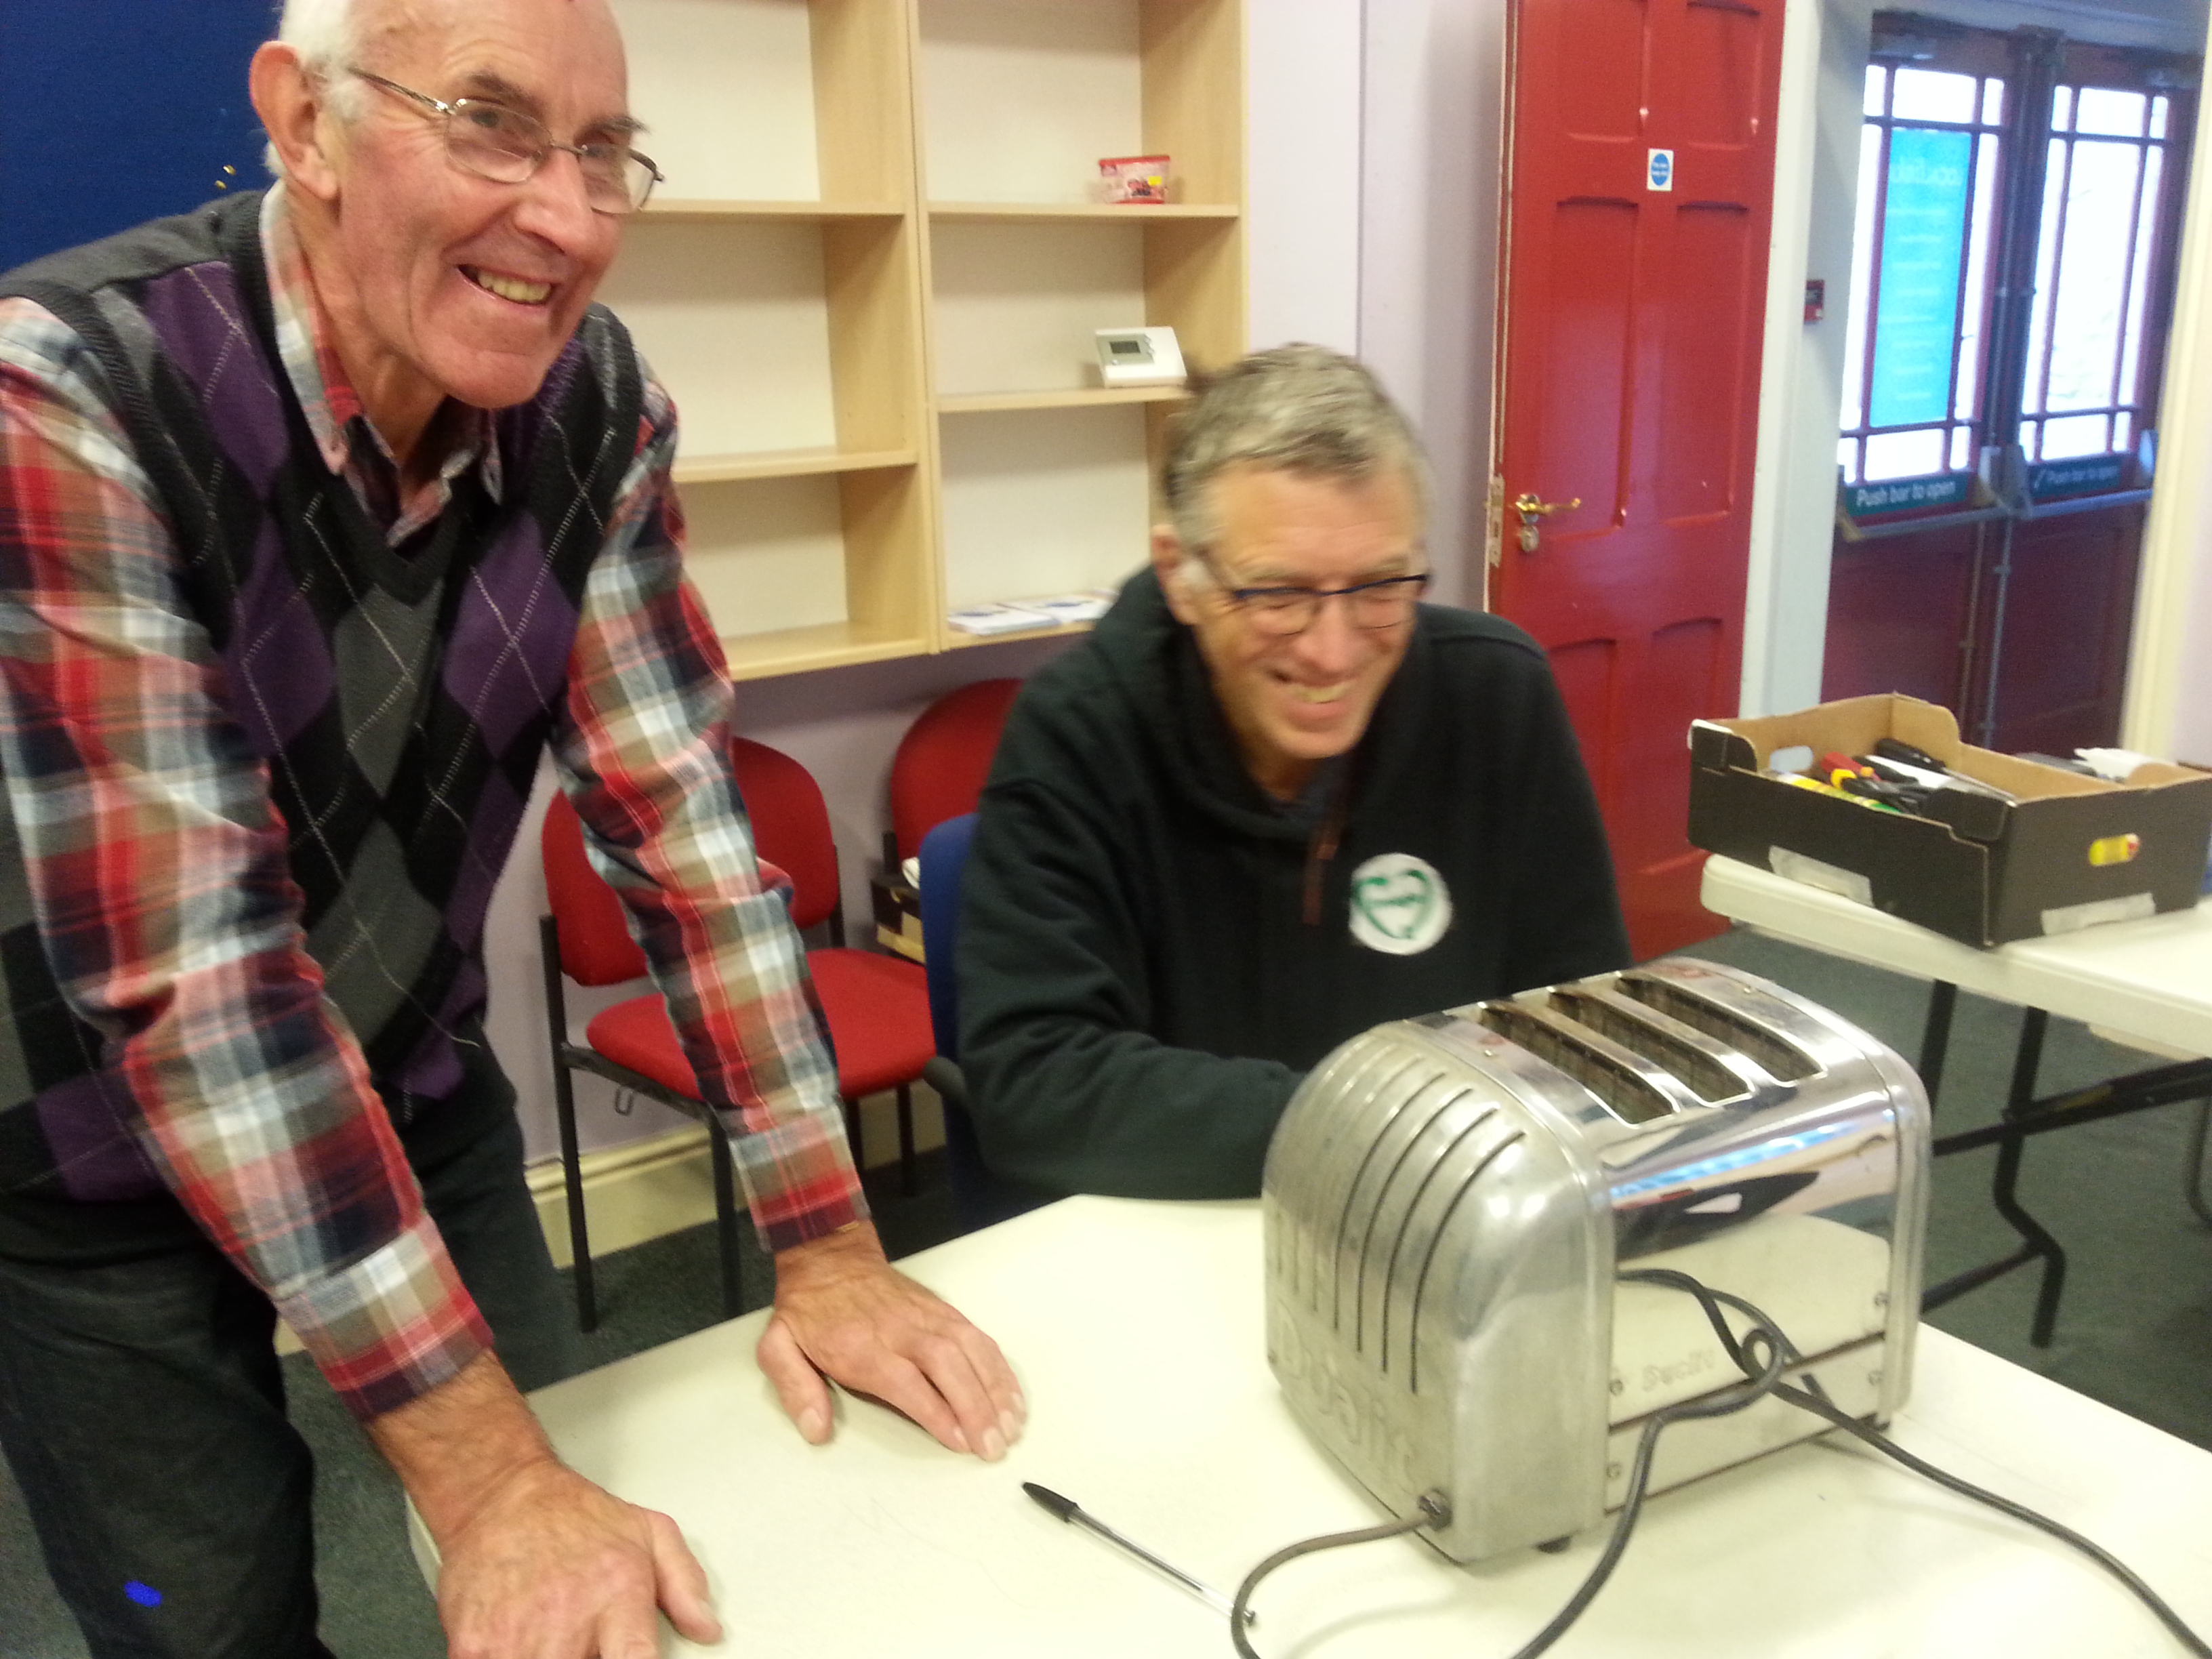 Volunteer Chris Cant fixing a toaster at Alston Moor Repair Cafe 23 Sept 2017 by CAfS